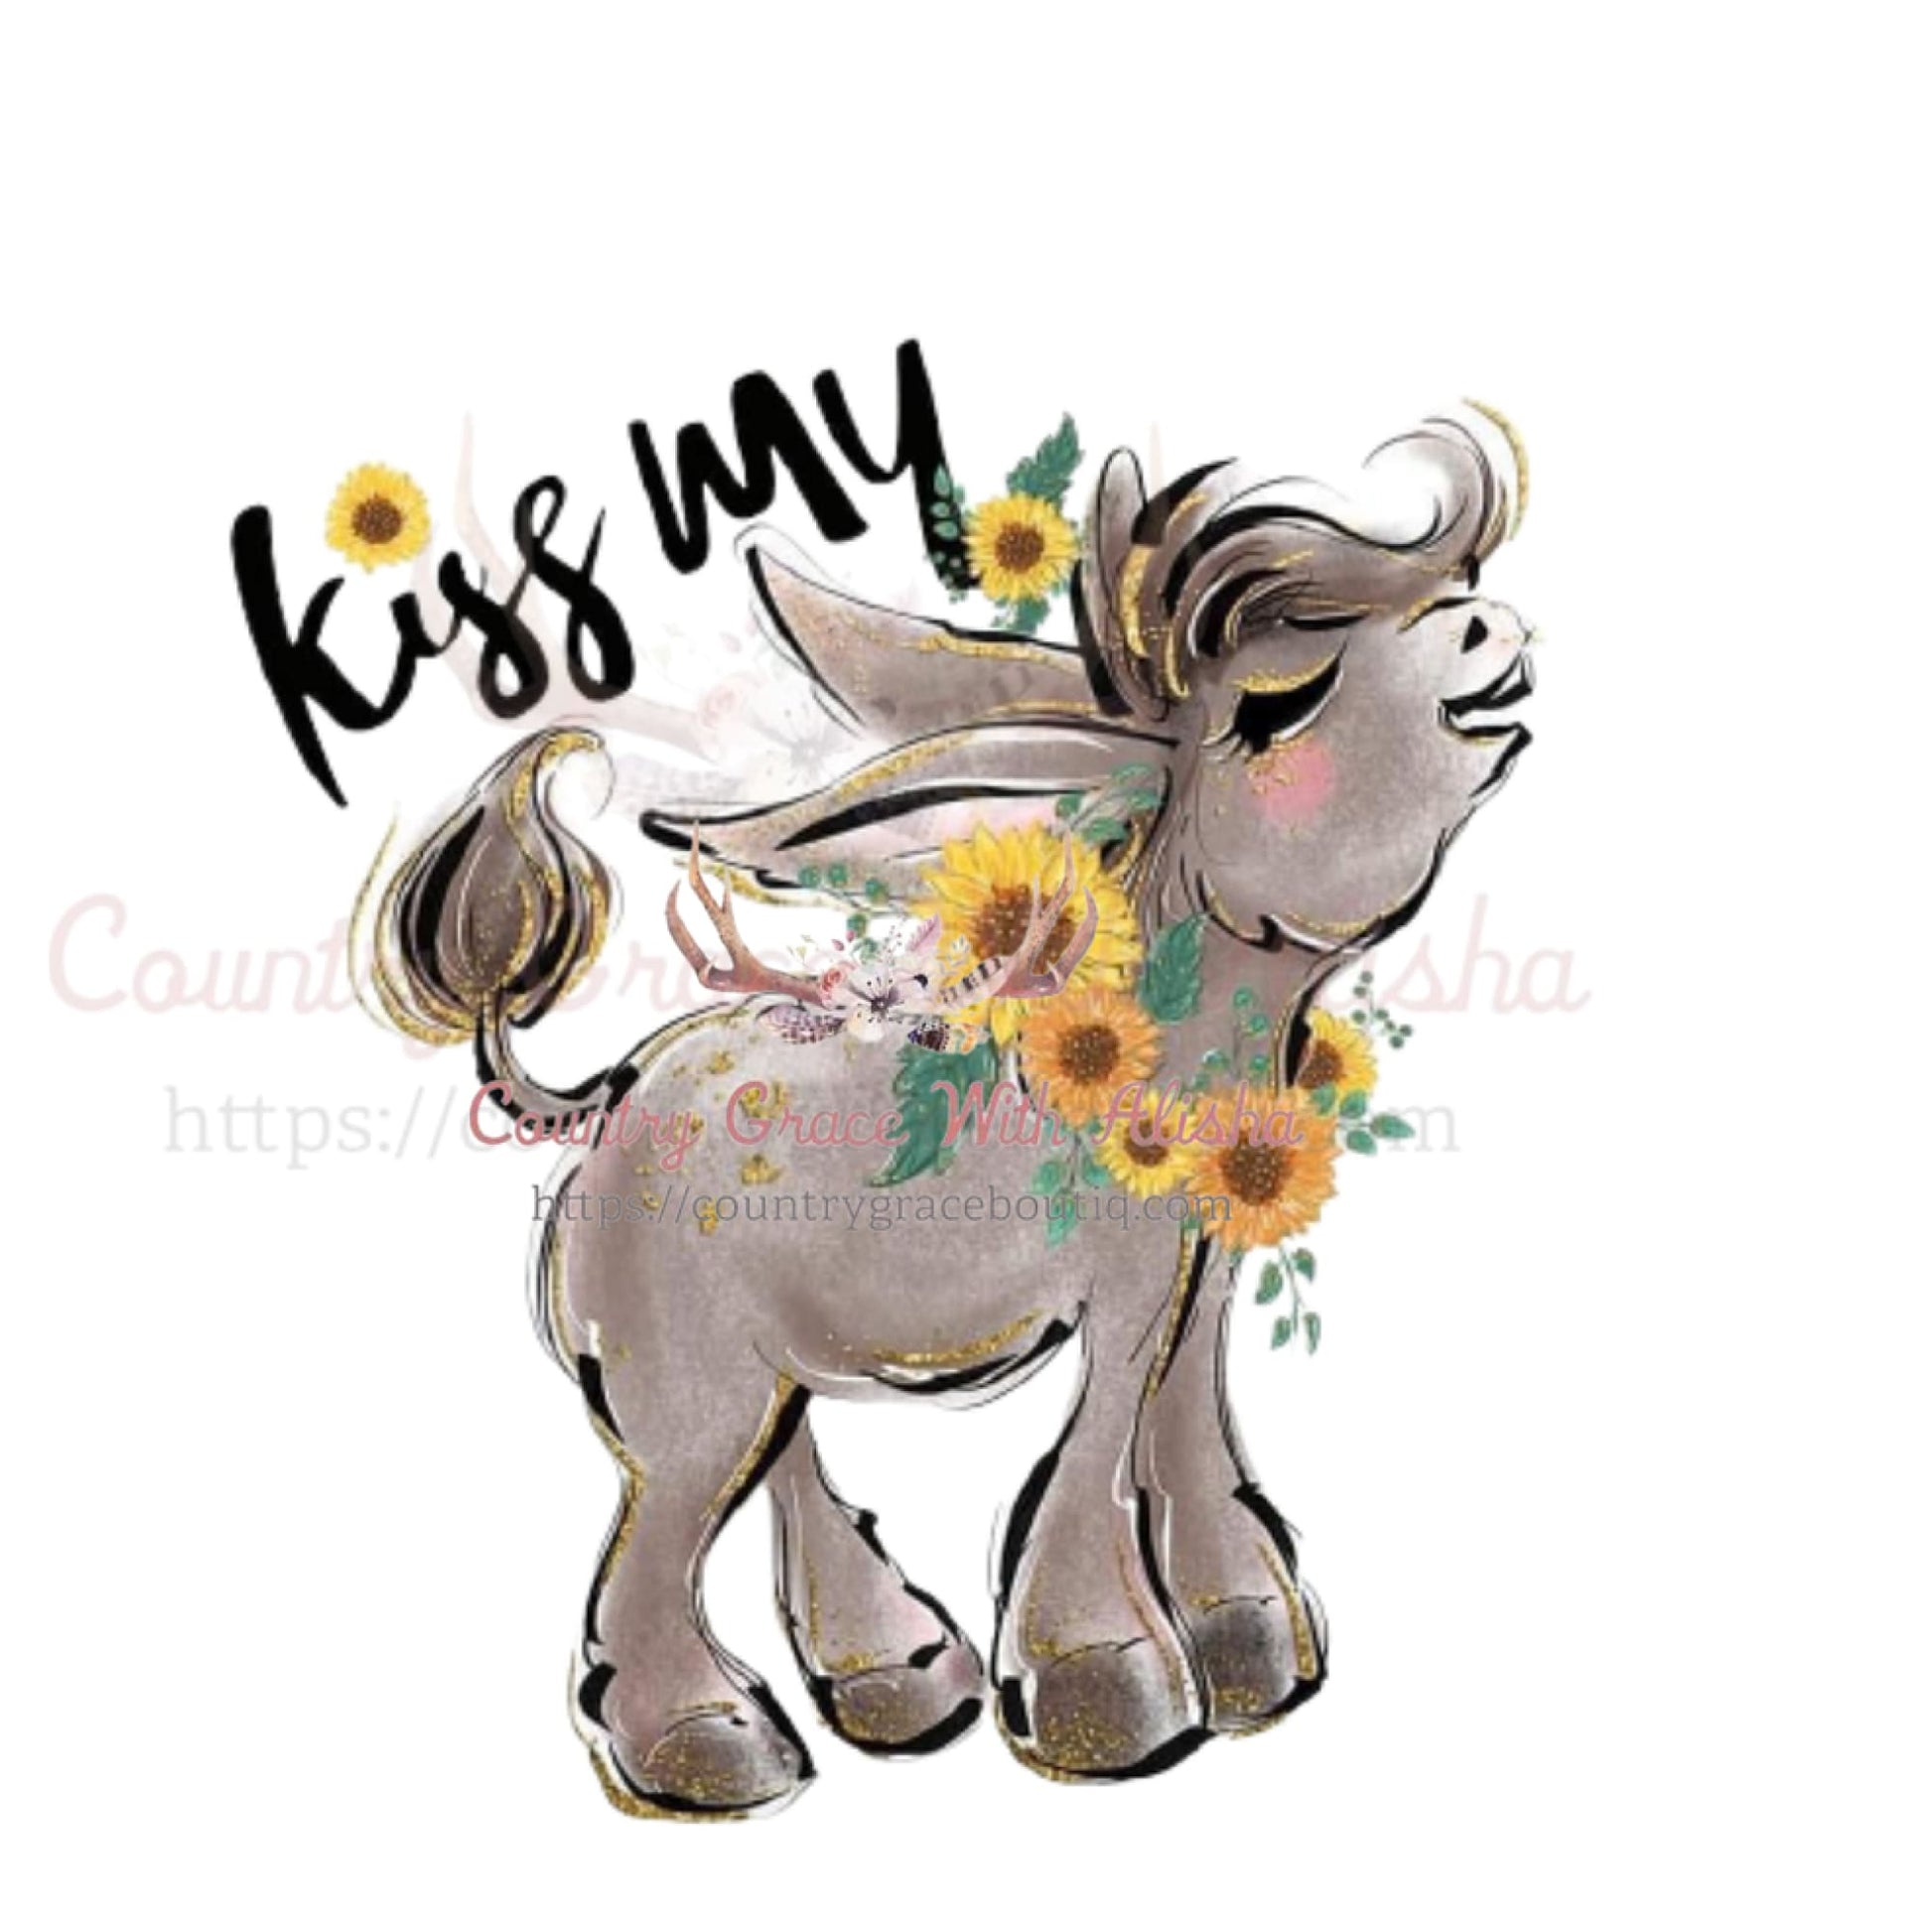 Kiss My Sublimation Transfer - Sub $1.50 Country Grace With 